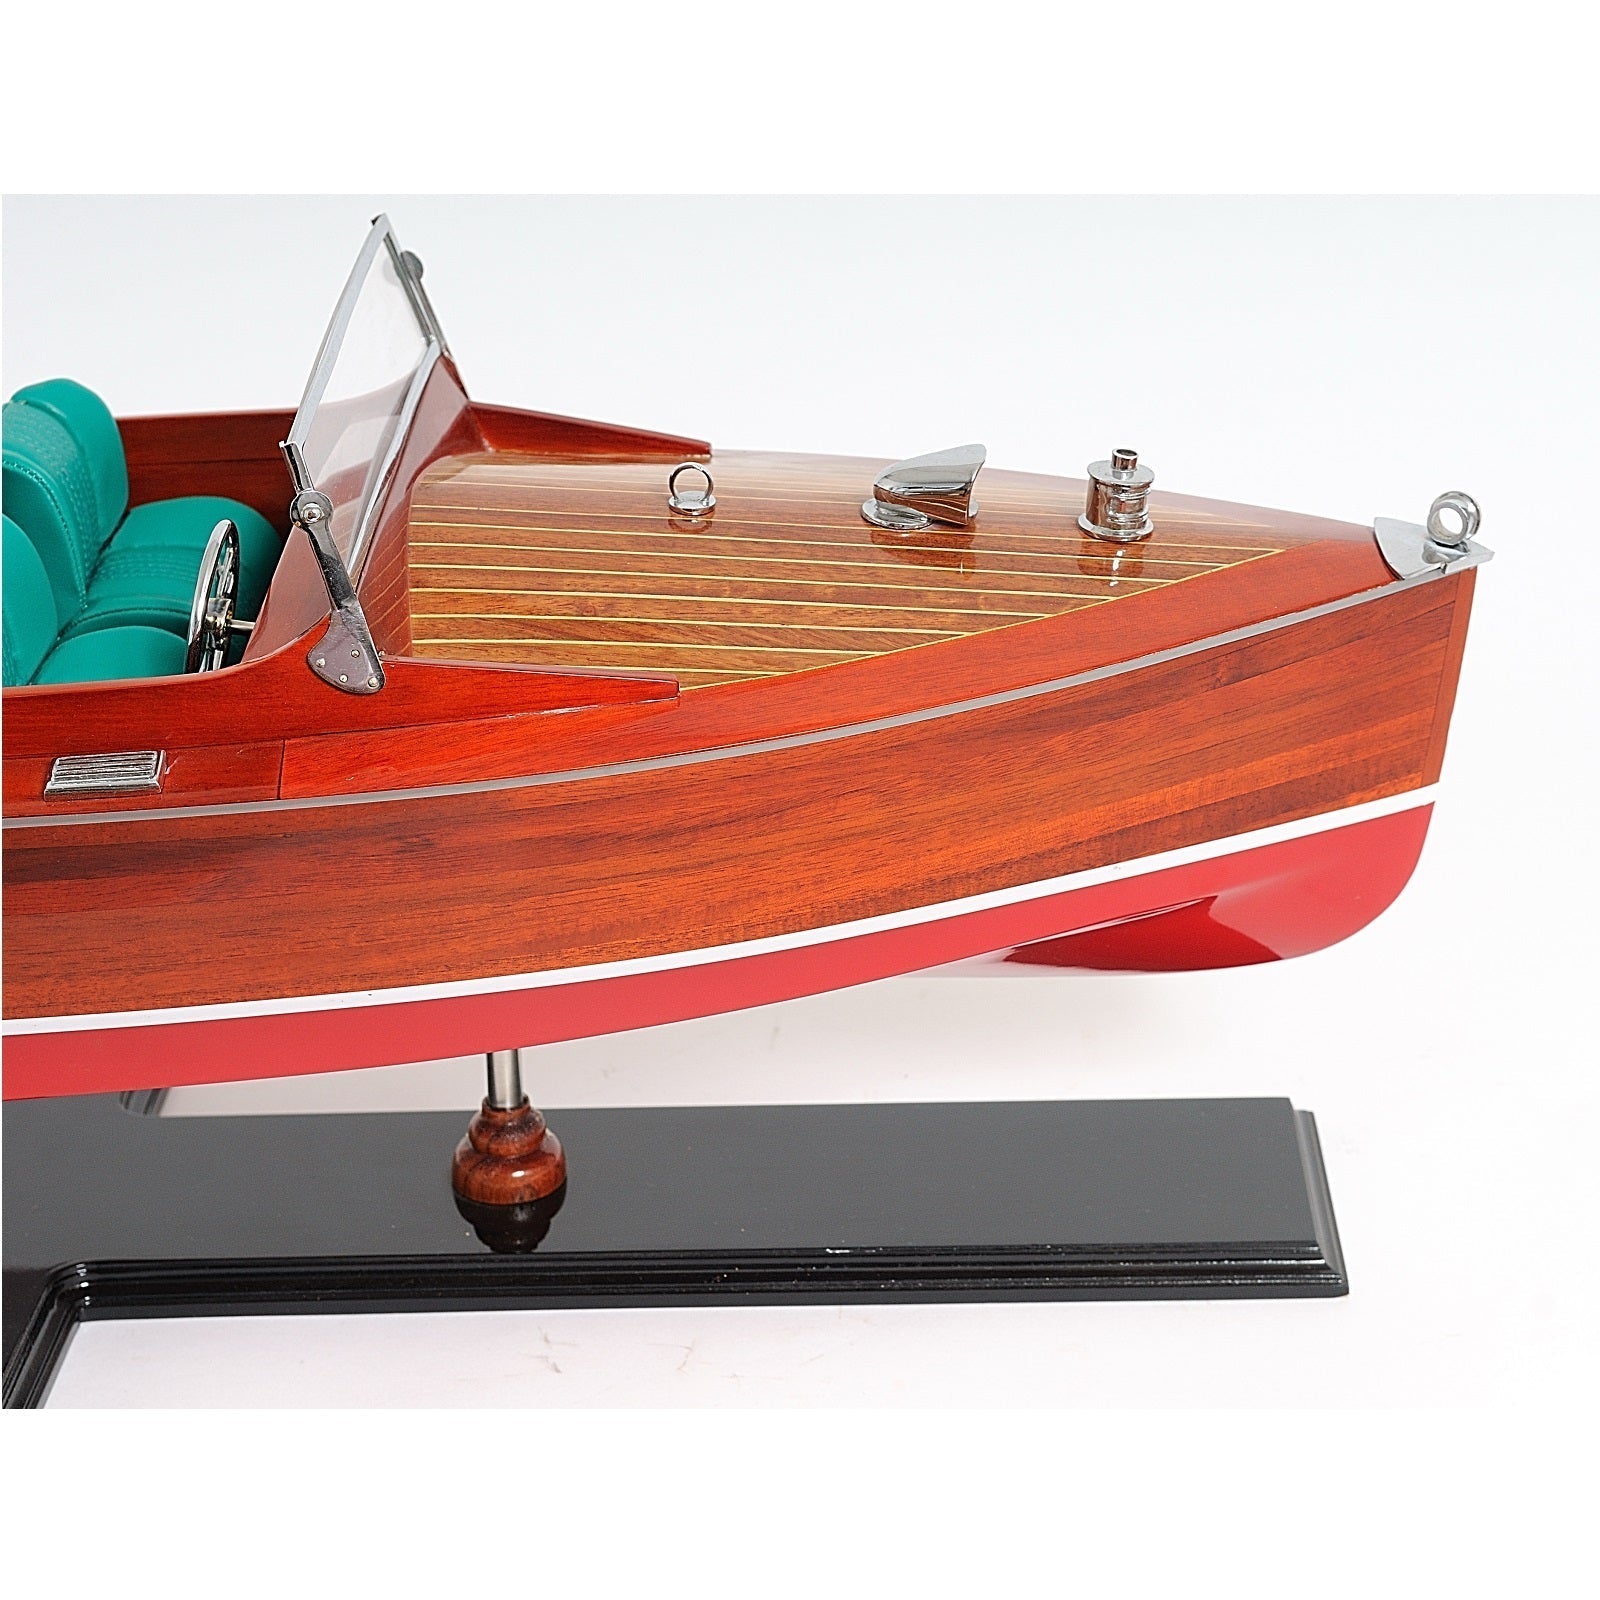 Chris Craft Runabout Painted, Fully Assembled